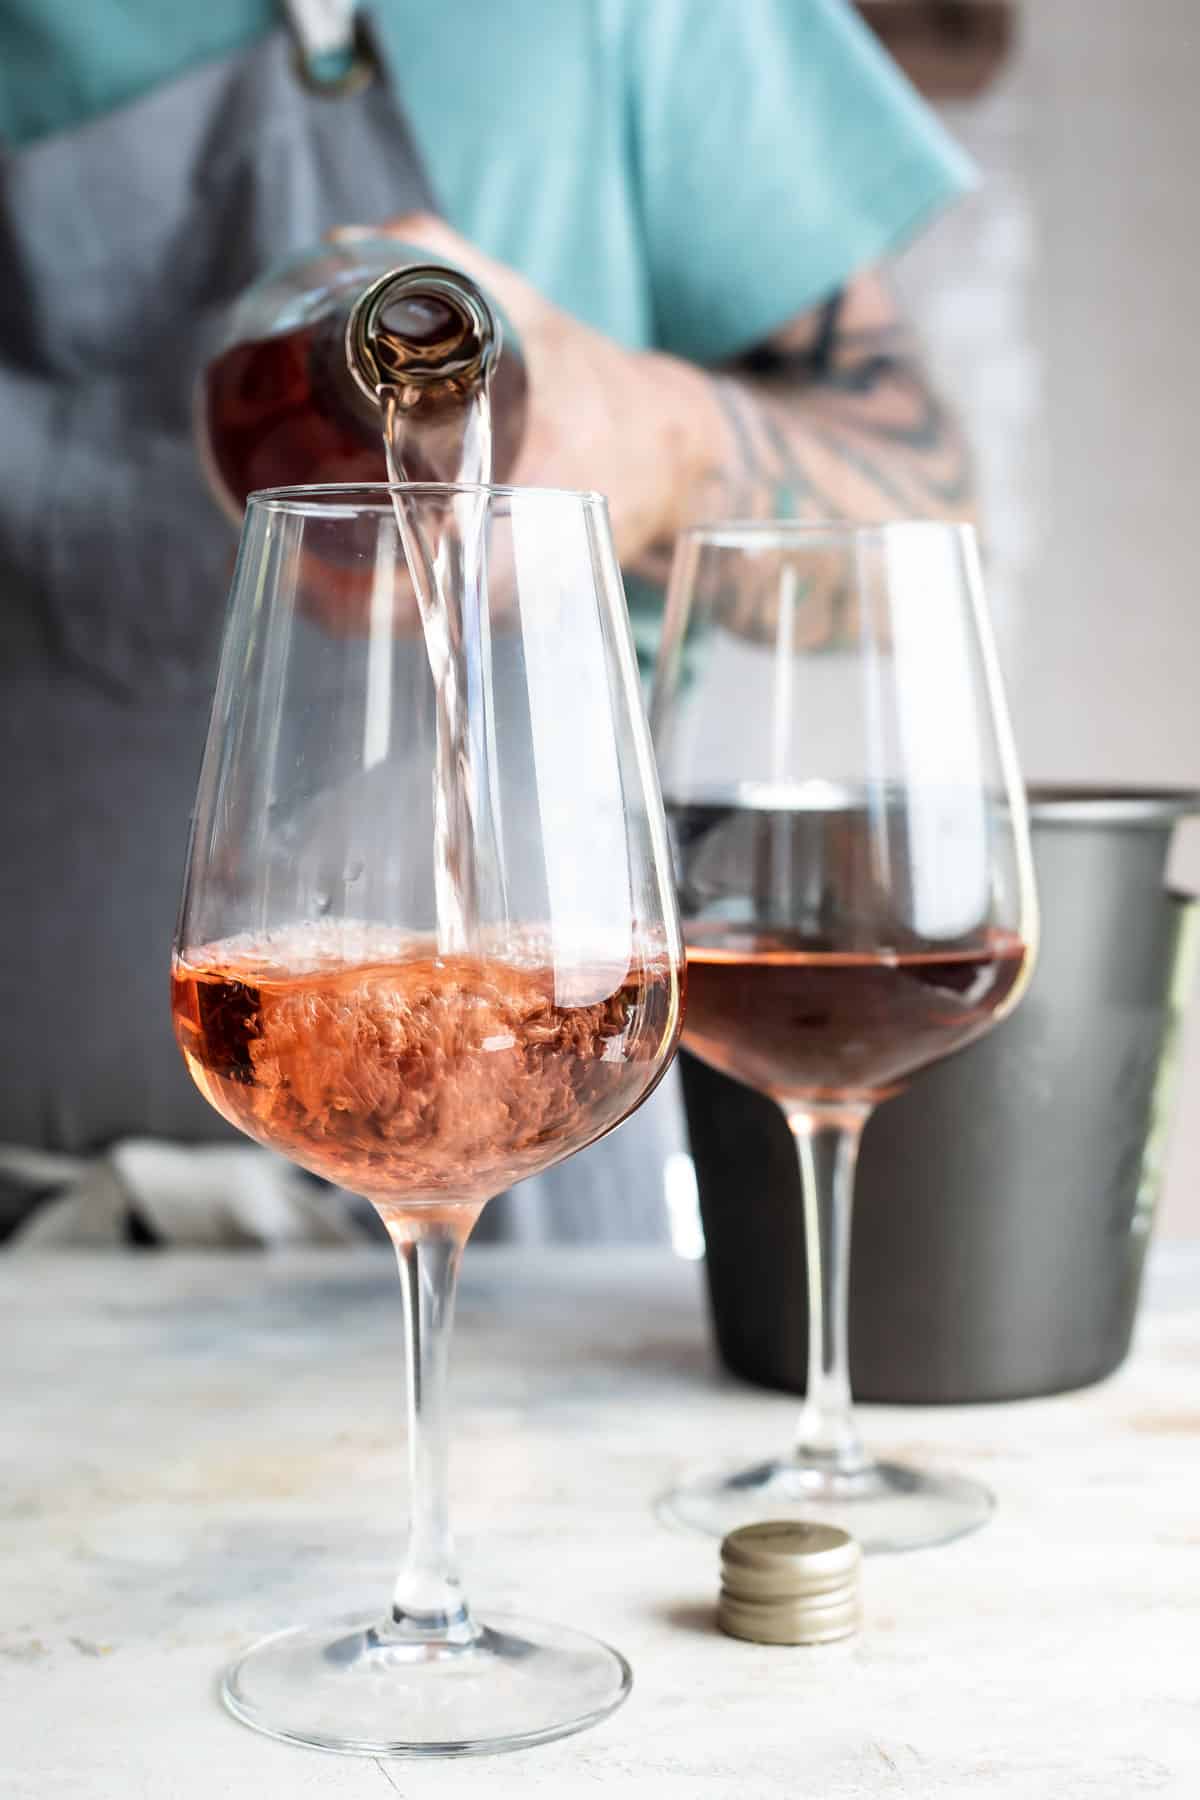 Somebody pouring two glasses of rose wine.